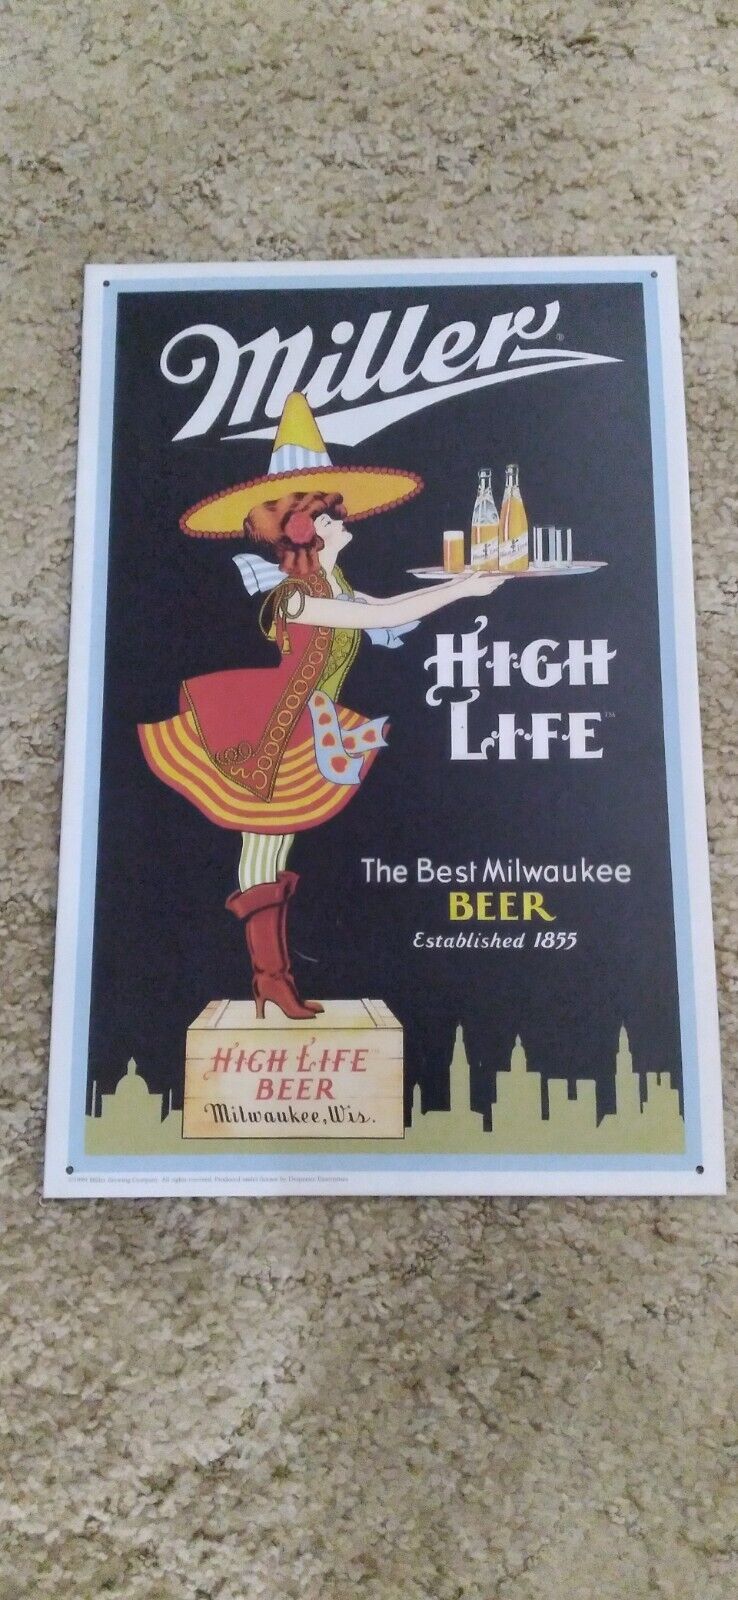 1999 MILLER HIGH LIFE BEER METAL SIGN, MADE IN U.S.A. GIRL ON THE MOON \